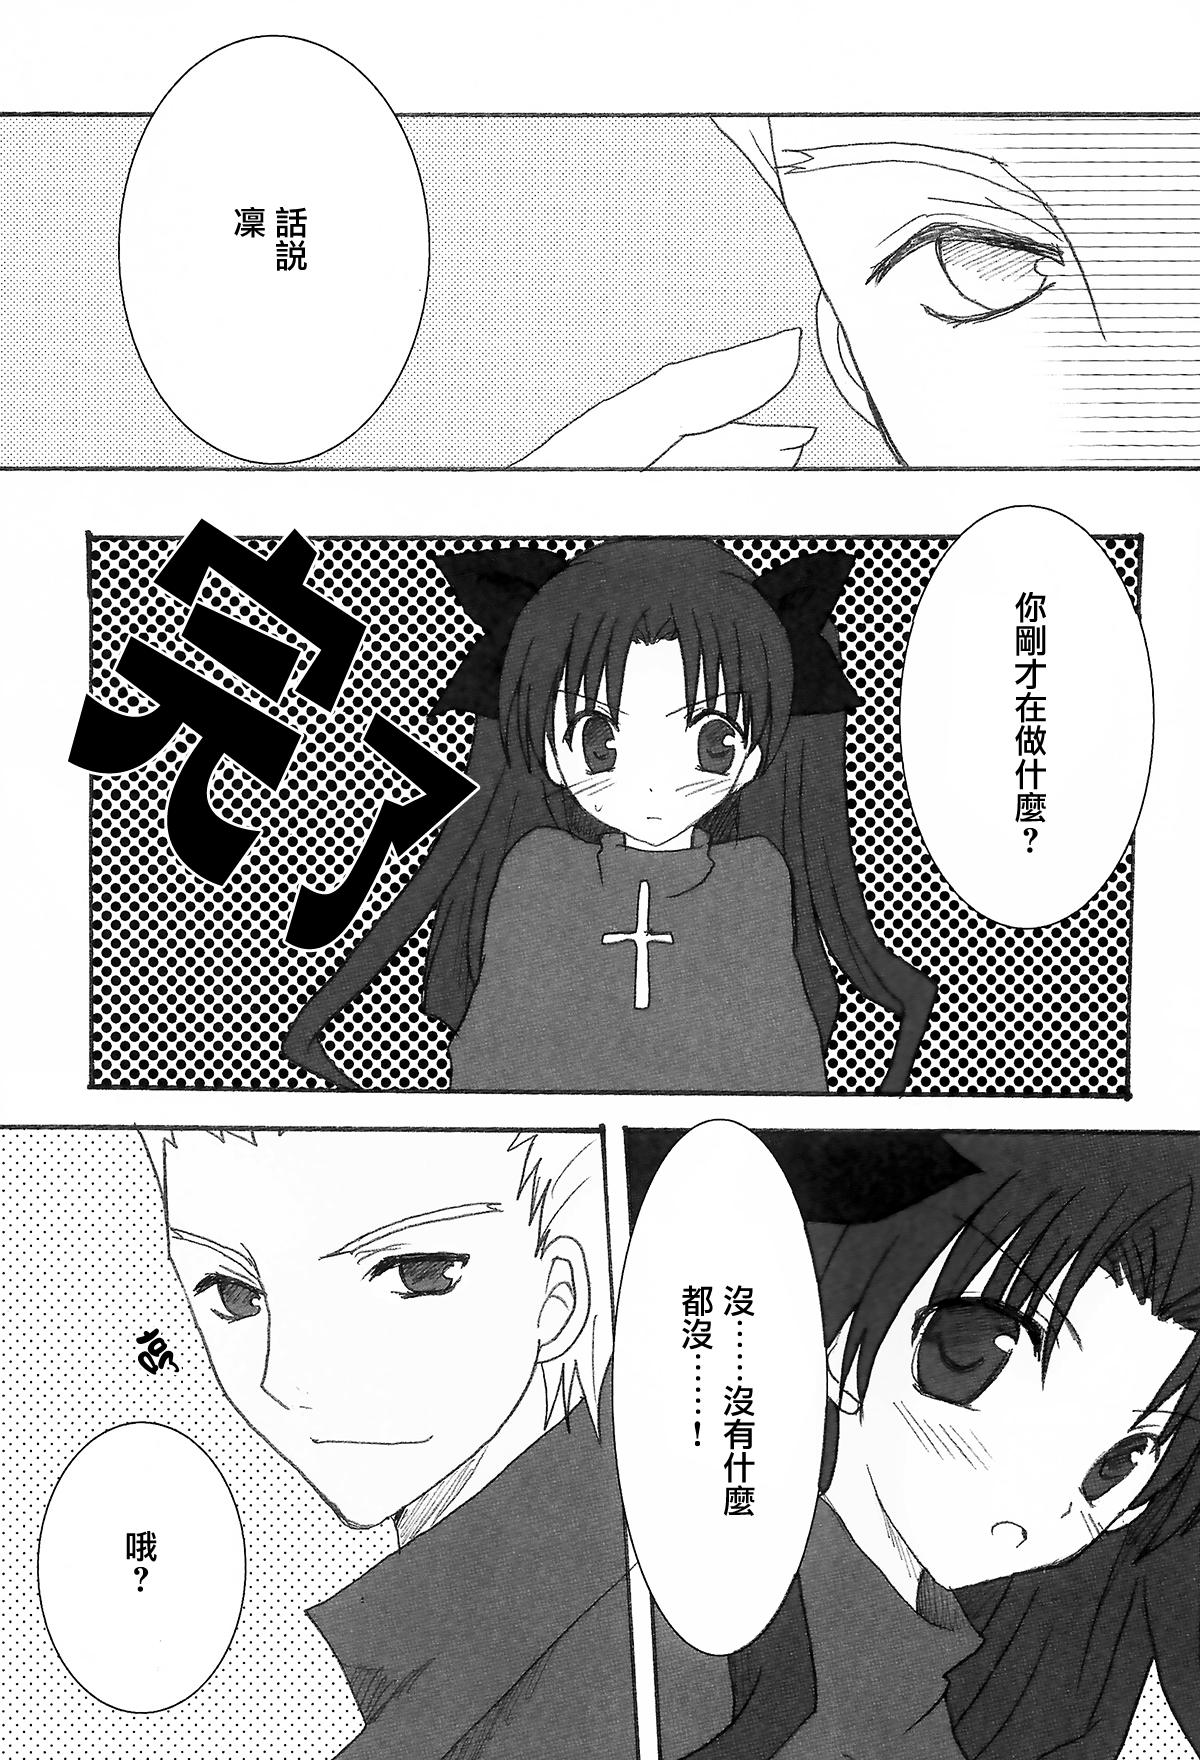 Exgf Infinite Emotion - Fate stay night Class Room - Page 8